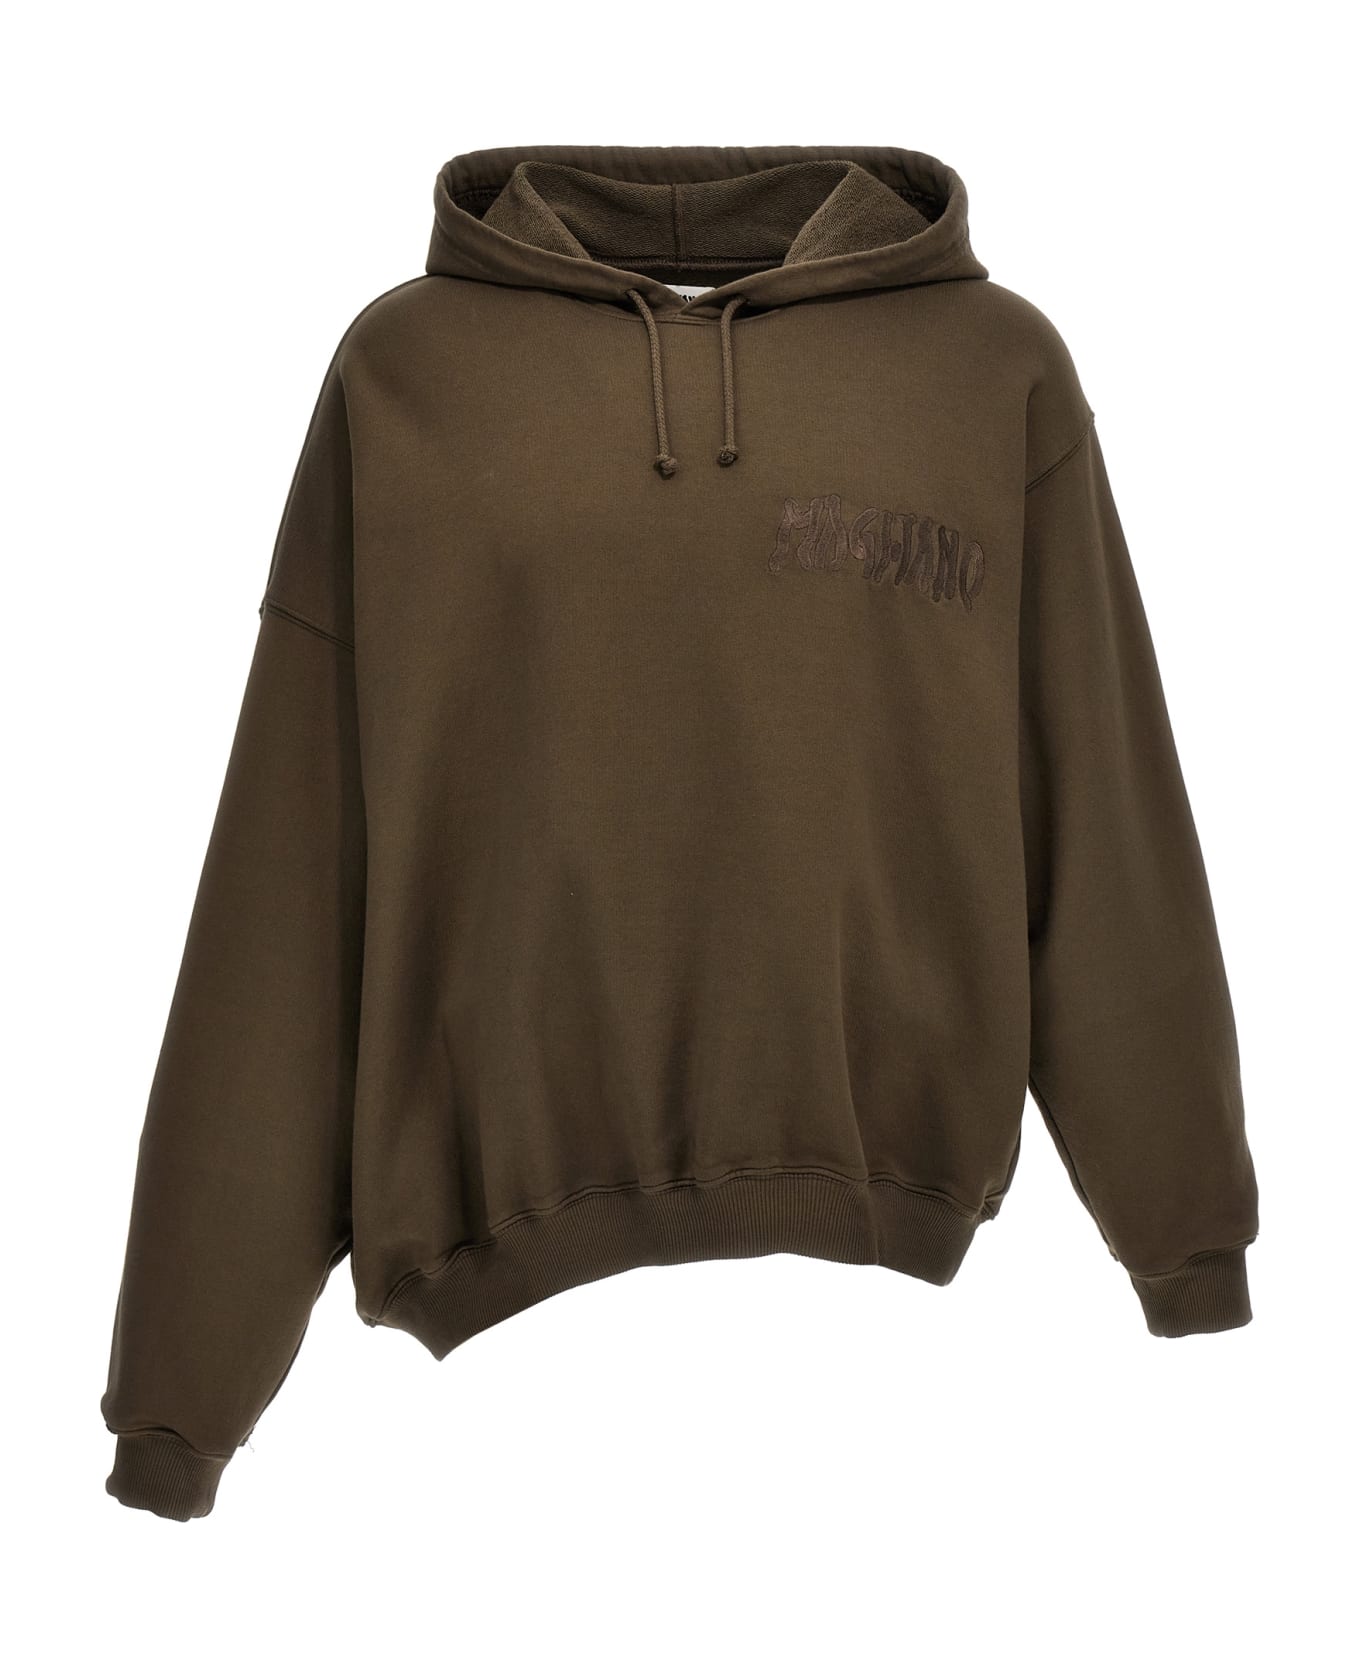 Magliano 'twisted' Hoodie - Brown